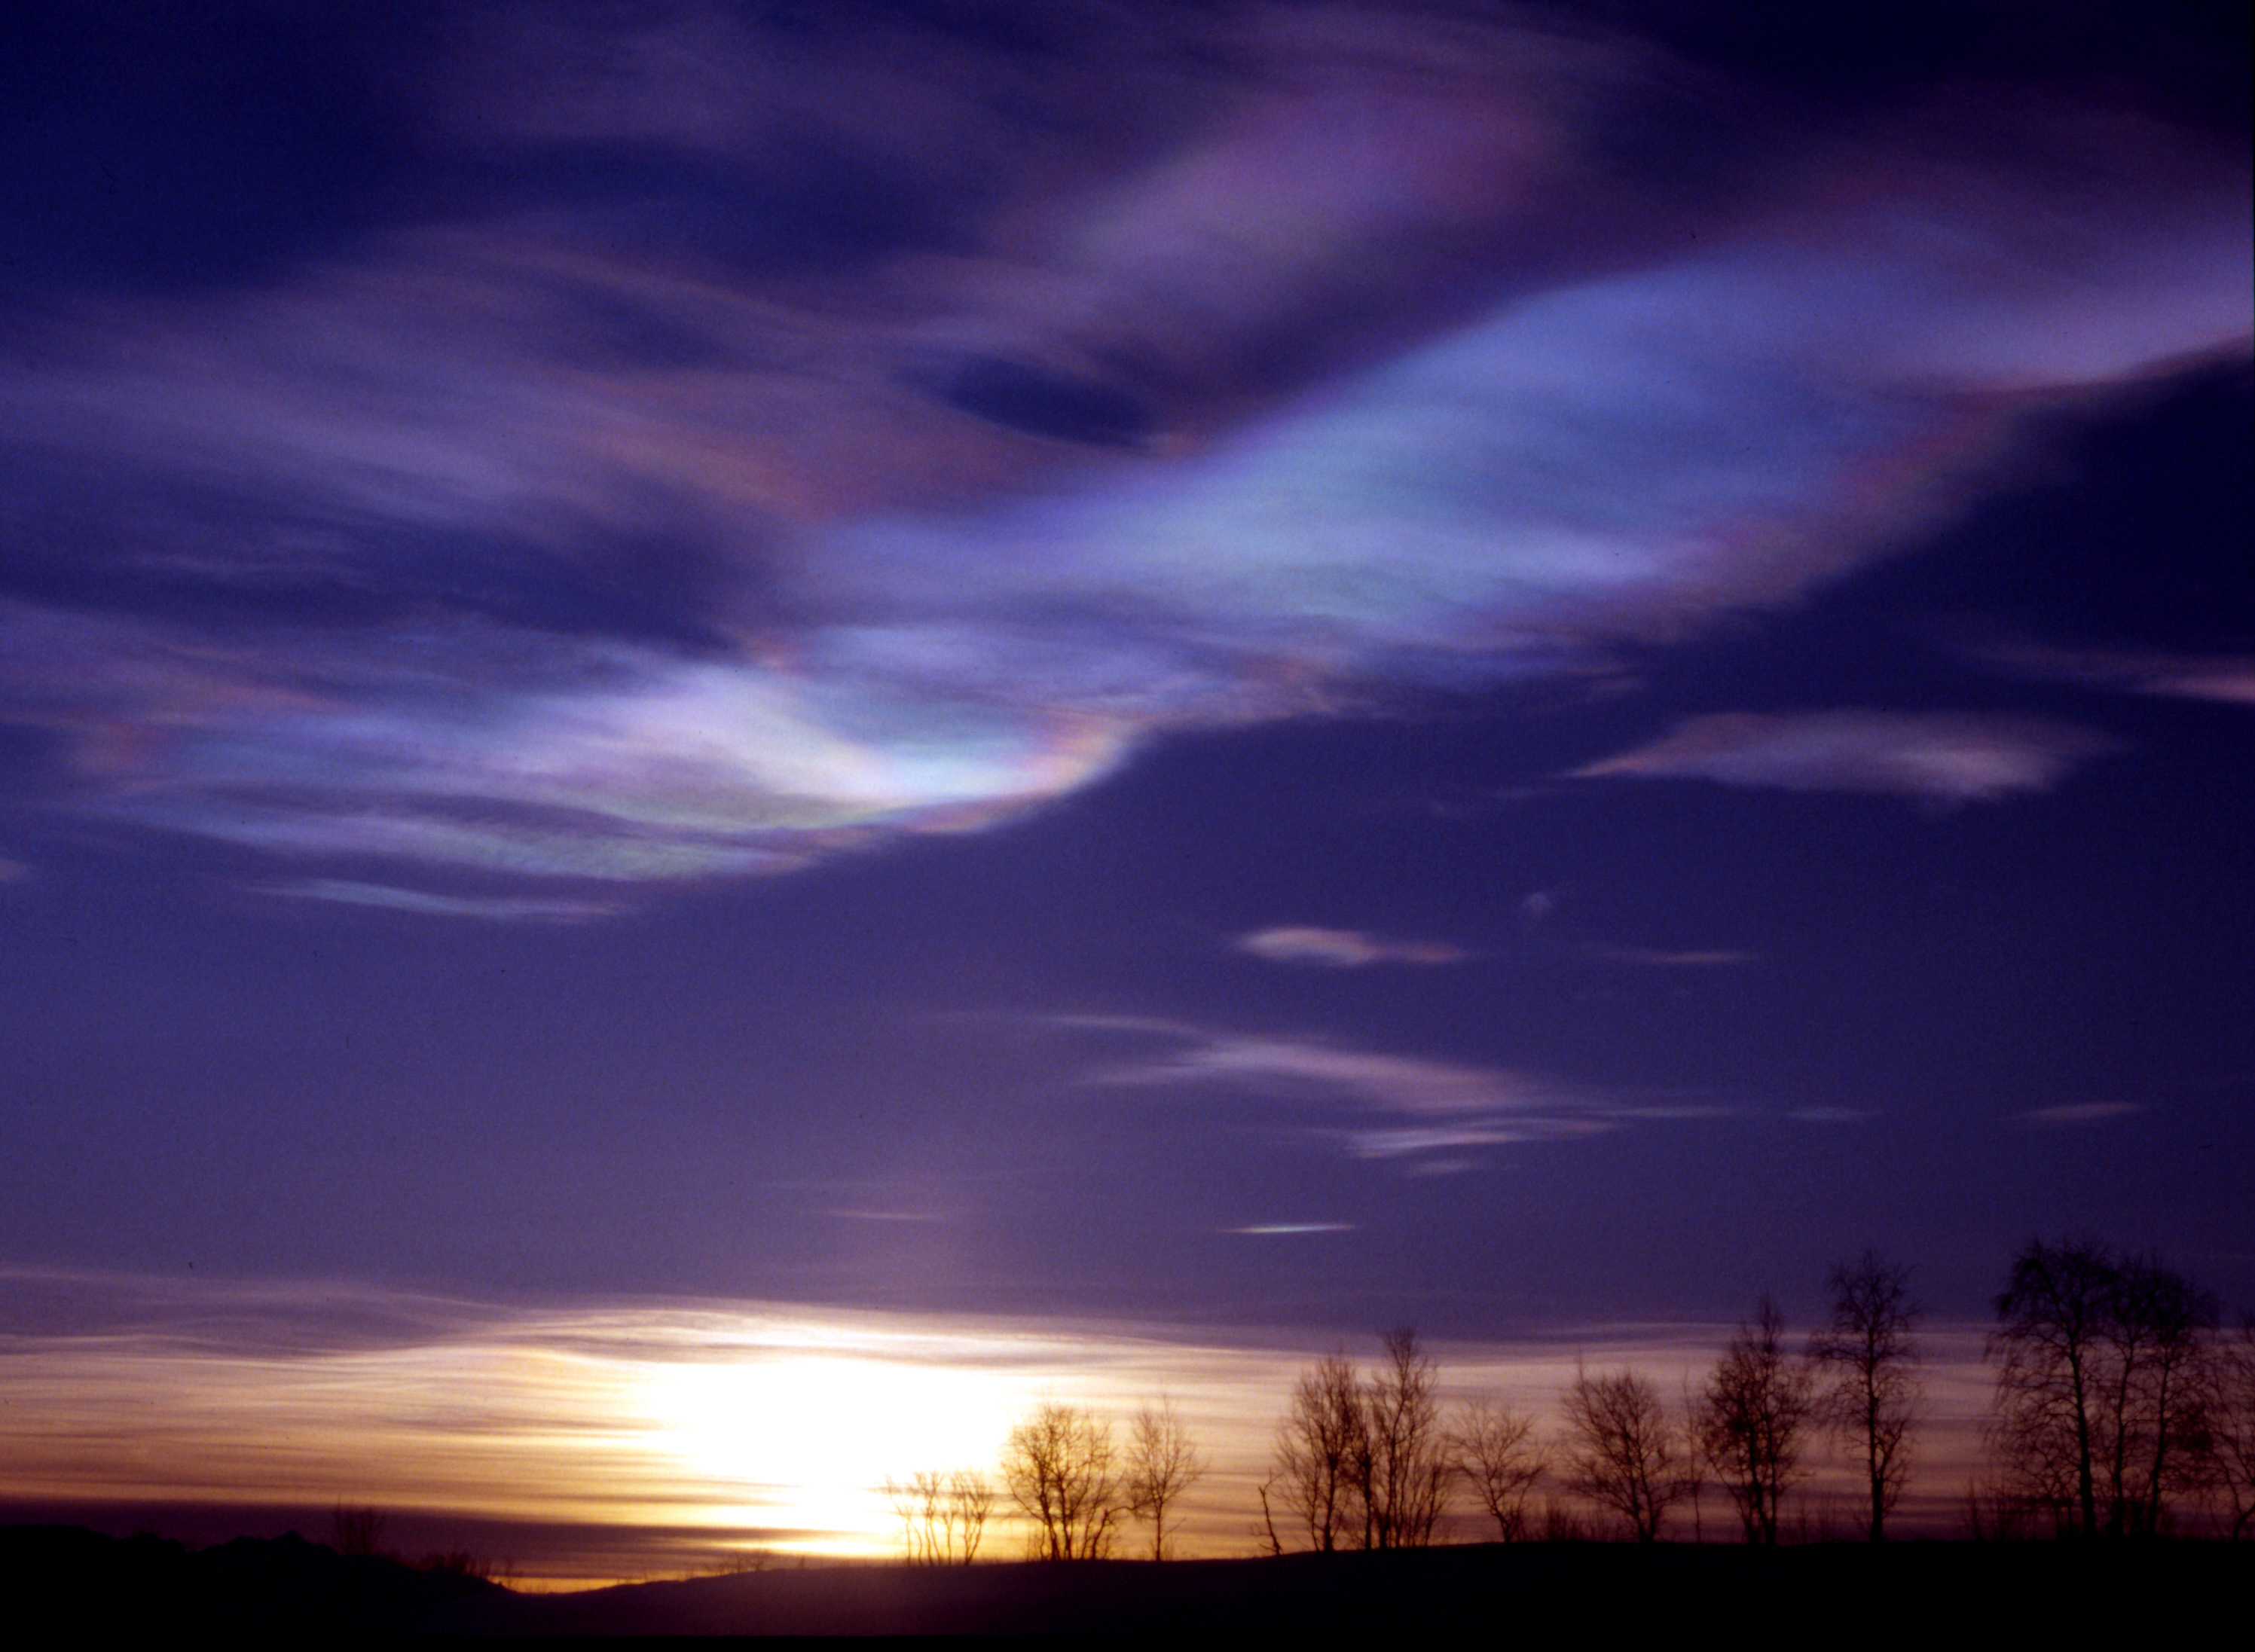 Stratospheric clouds above the Arctic, like those seen here over Kiruna, Sweden, provide ideal conditions for chemical reactions that transform chlorine to a form that depletes the Earth’s protective ozone layer. New research shows that unless greenhouse gas emissions are reduced, climate patterns that favor the formation of such clouds will continue to accelerate ozone loss. (Photo Credit: Ross Salawitch/UMD)